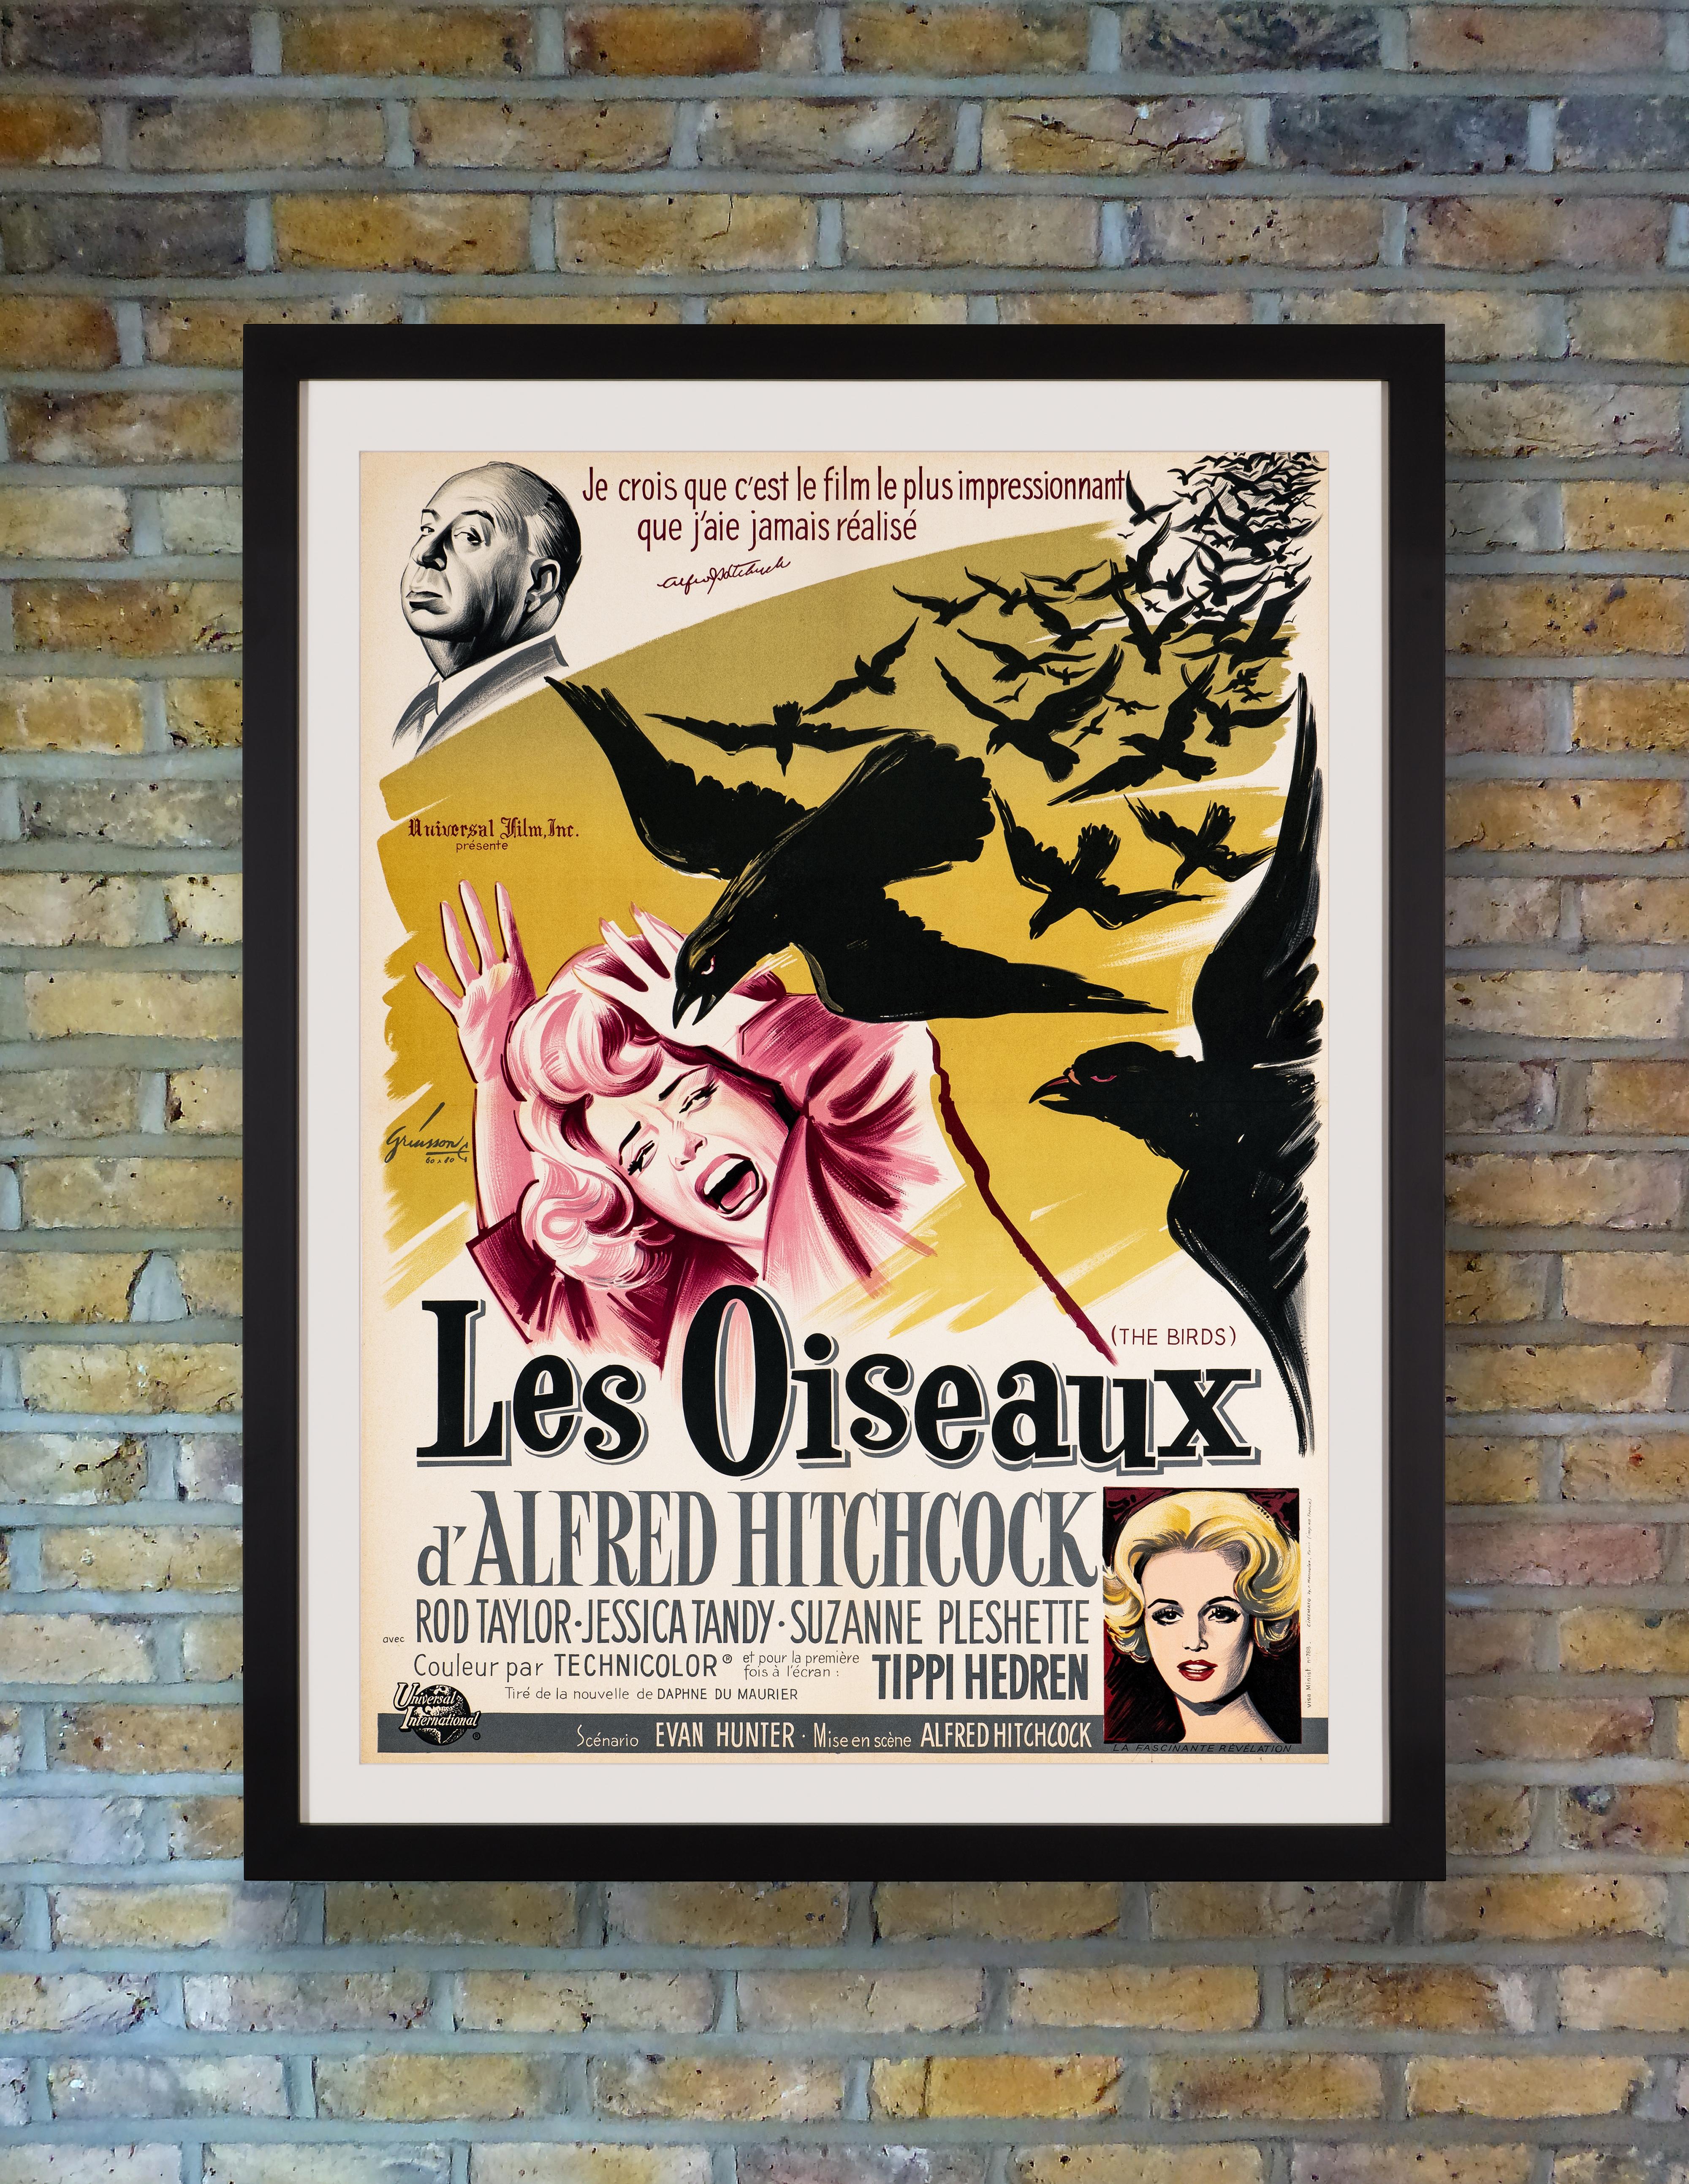 A spooky French Moyenne poster by prolific French poster artist Boris Grinsson for Alfred Hitchcock's 1963 psychological masterpiece 'The Birds,' based on Daphne du Maurier's 1952 short story of the same name, starring Tippi Hendren in her debut